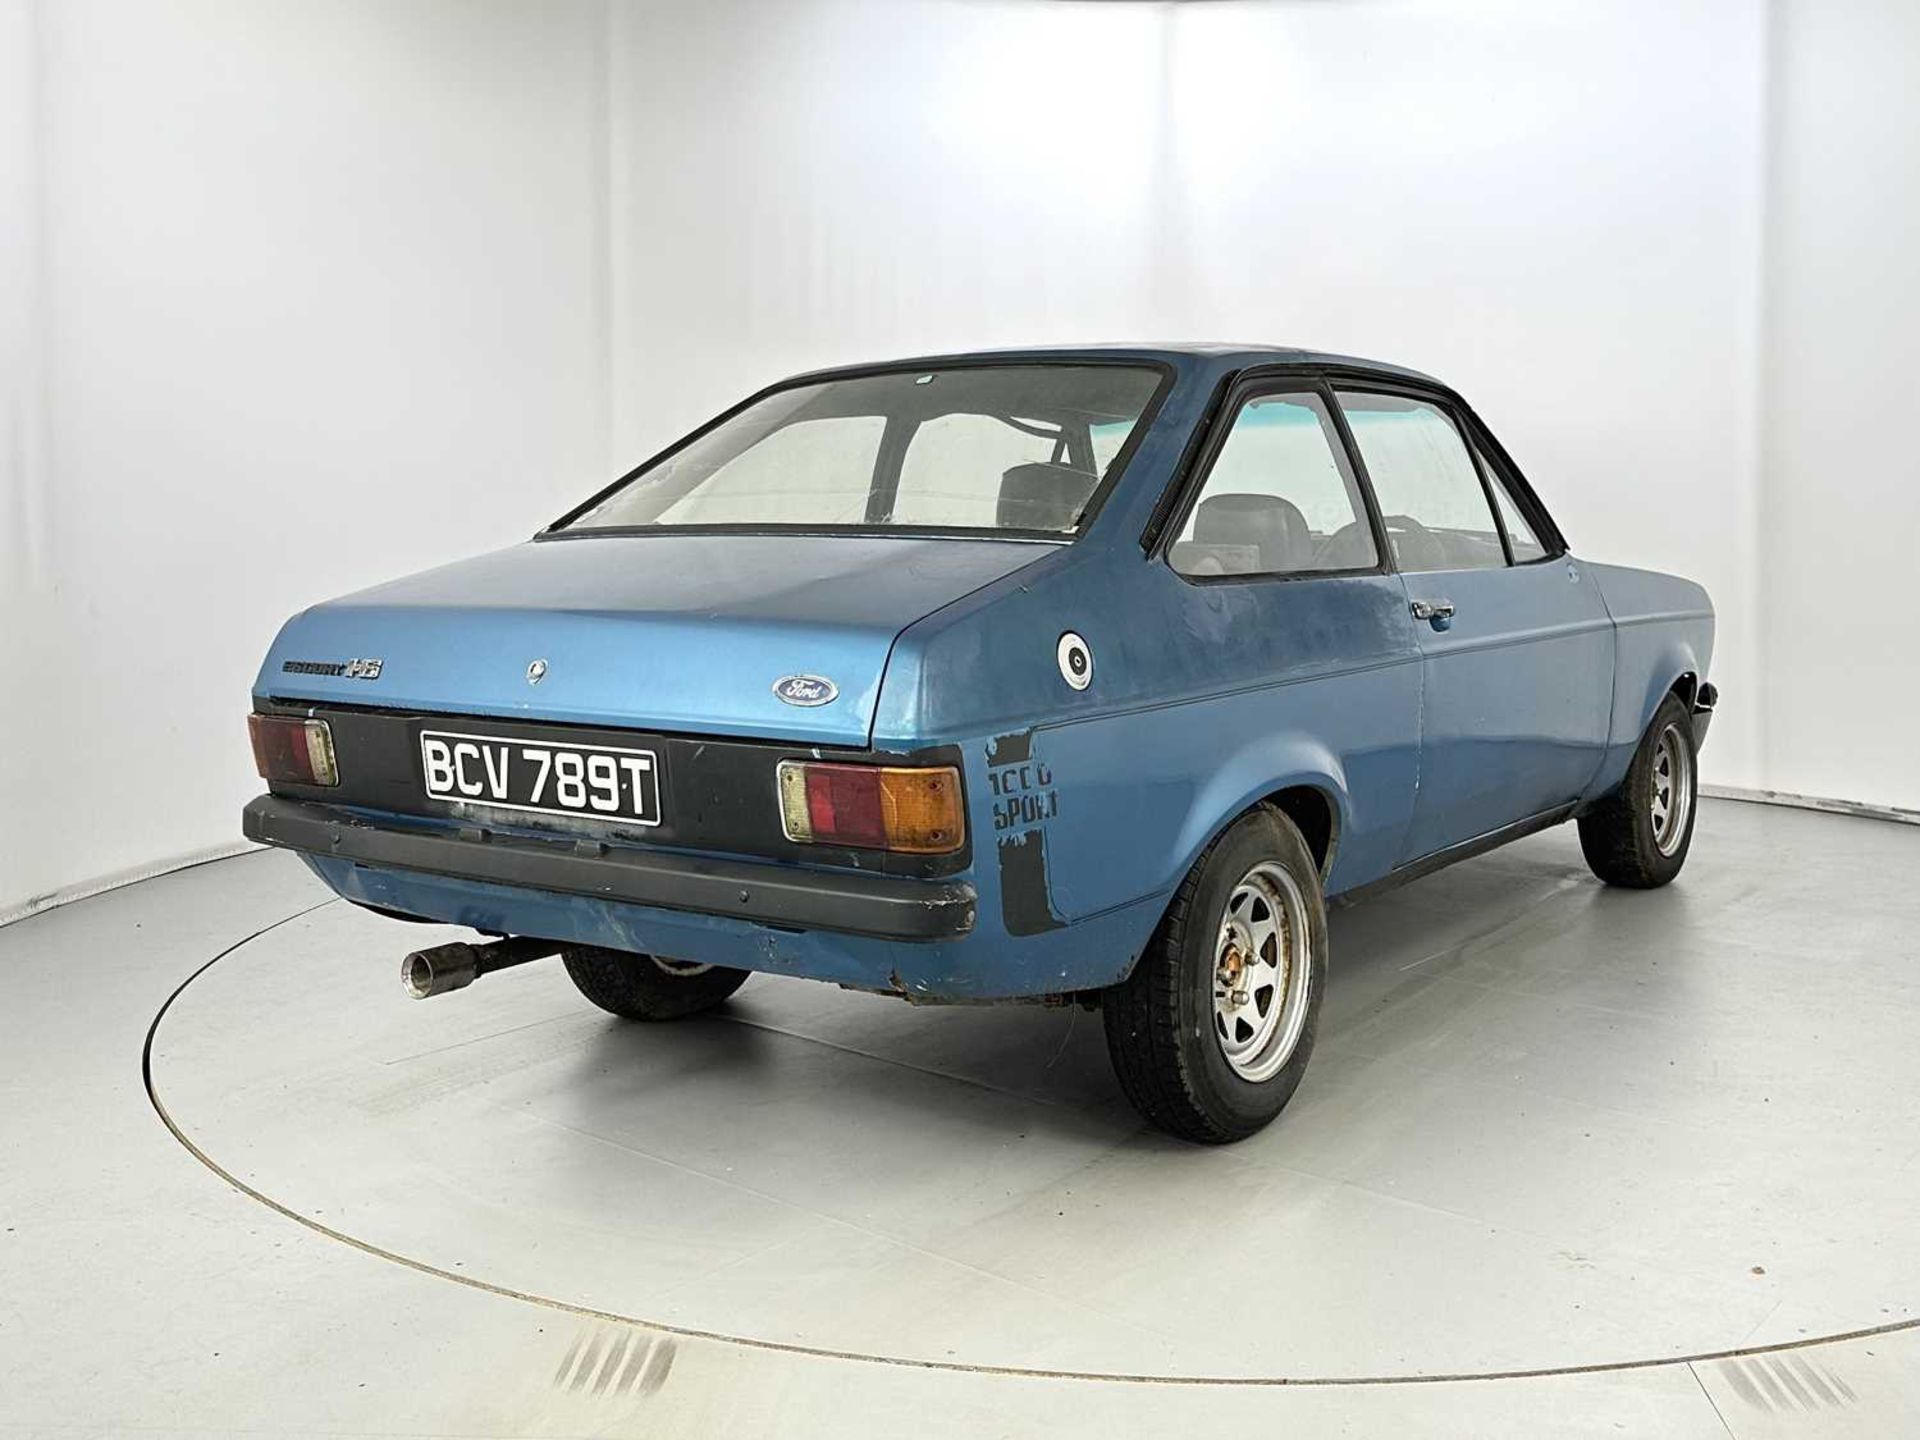 1979 Ford Escort 1600 Sport - Image 9 of 22